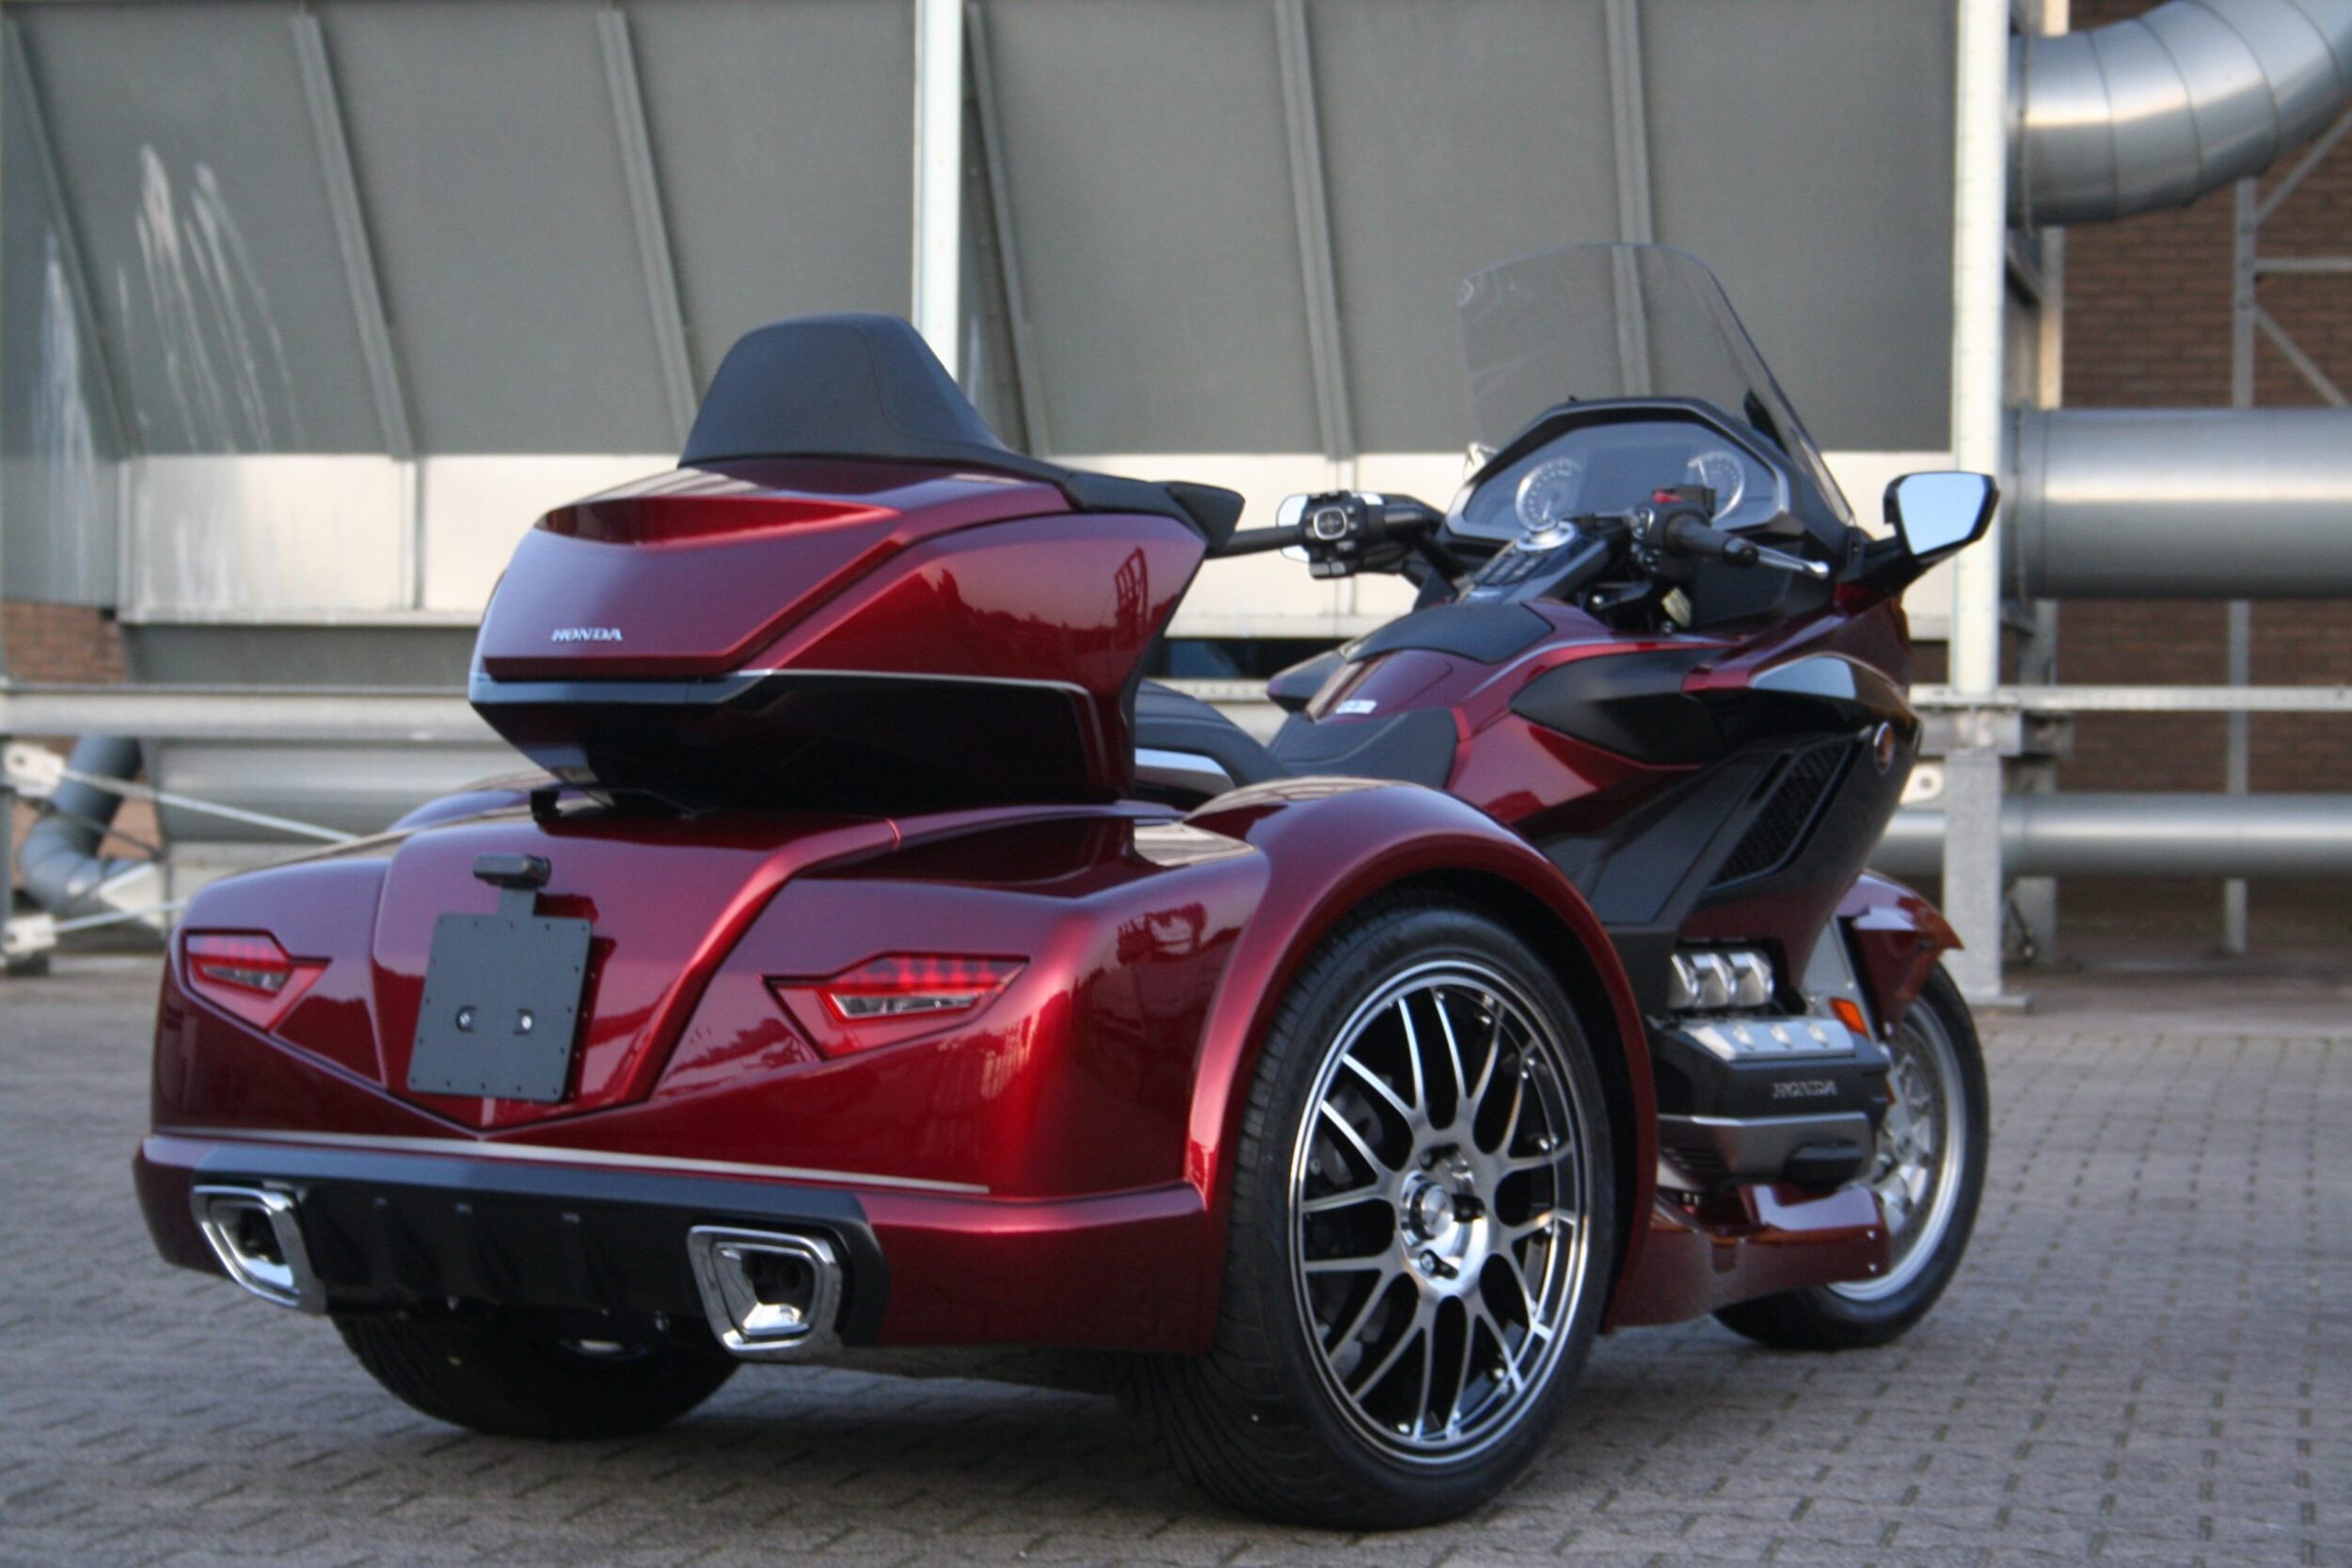 New EML Martinique GTS kit for the new Honda Goldwing - EML Trikes   Sidecars